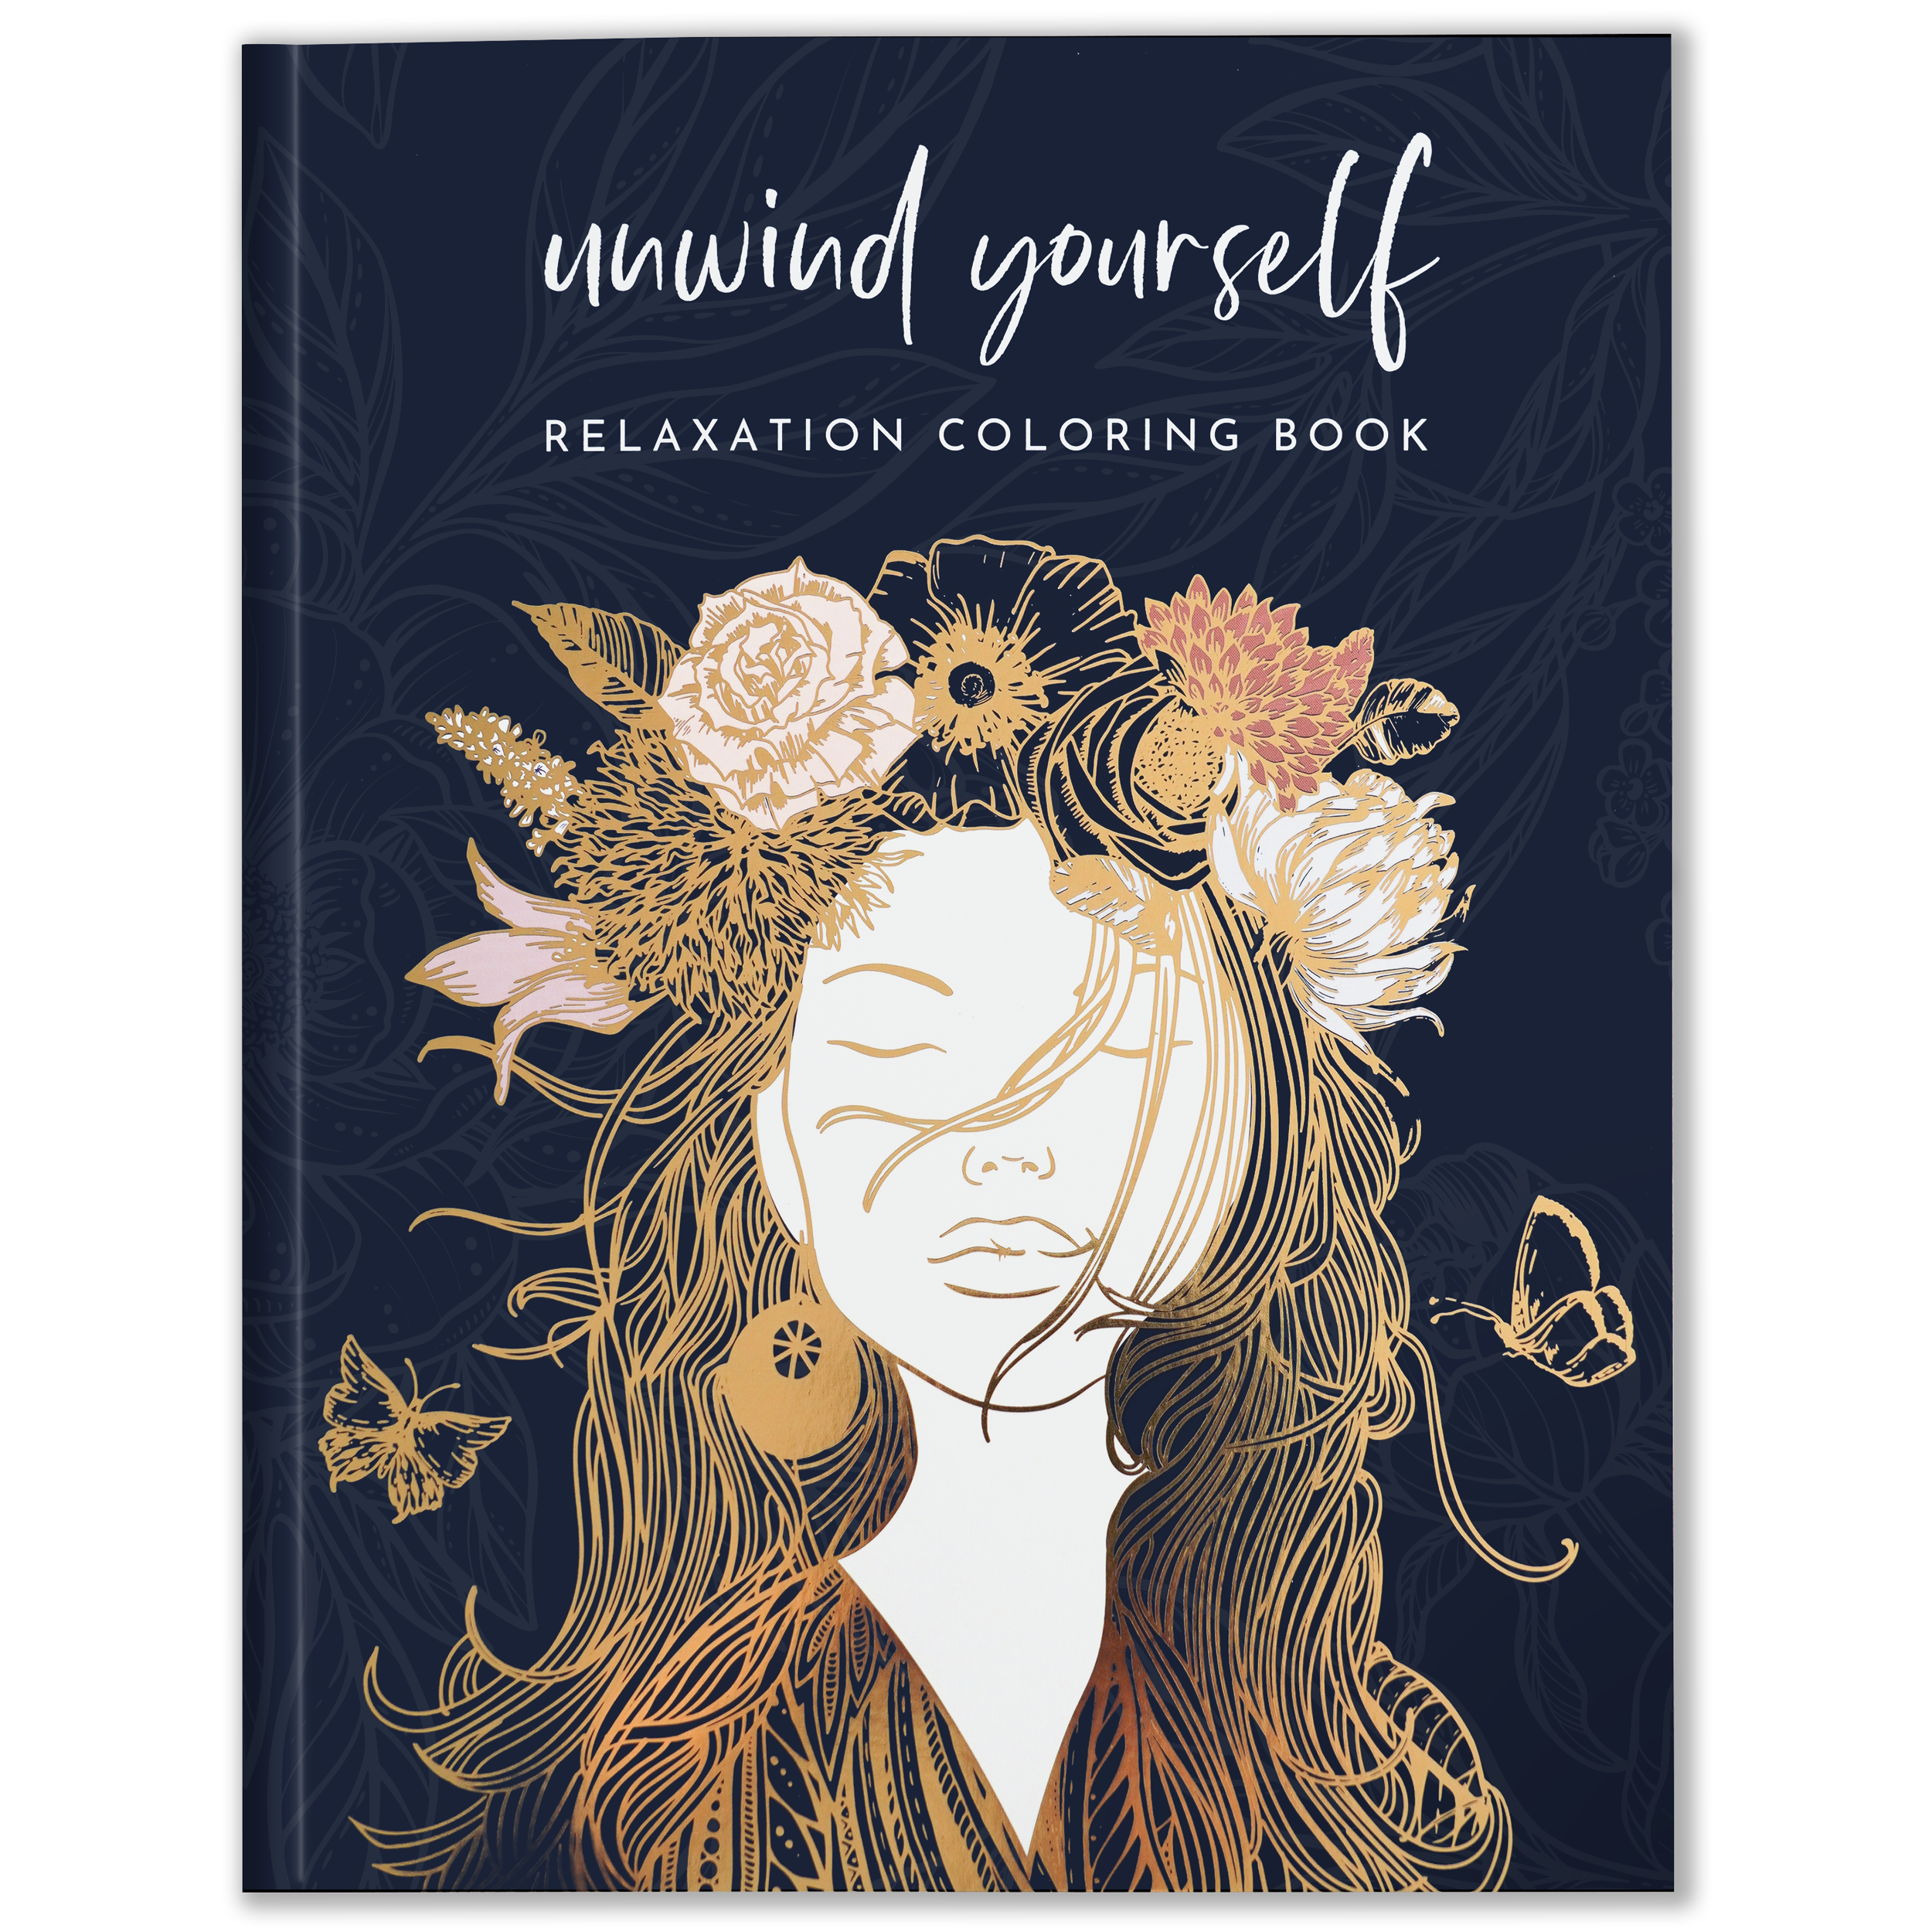 10 Benefits of Adult Coloring Books on Stress & Anxiety